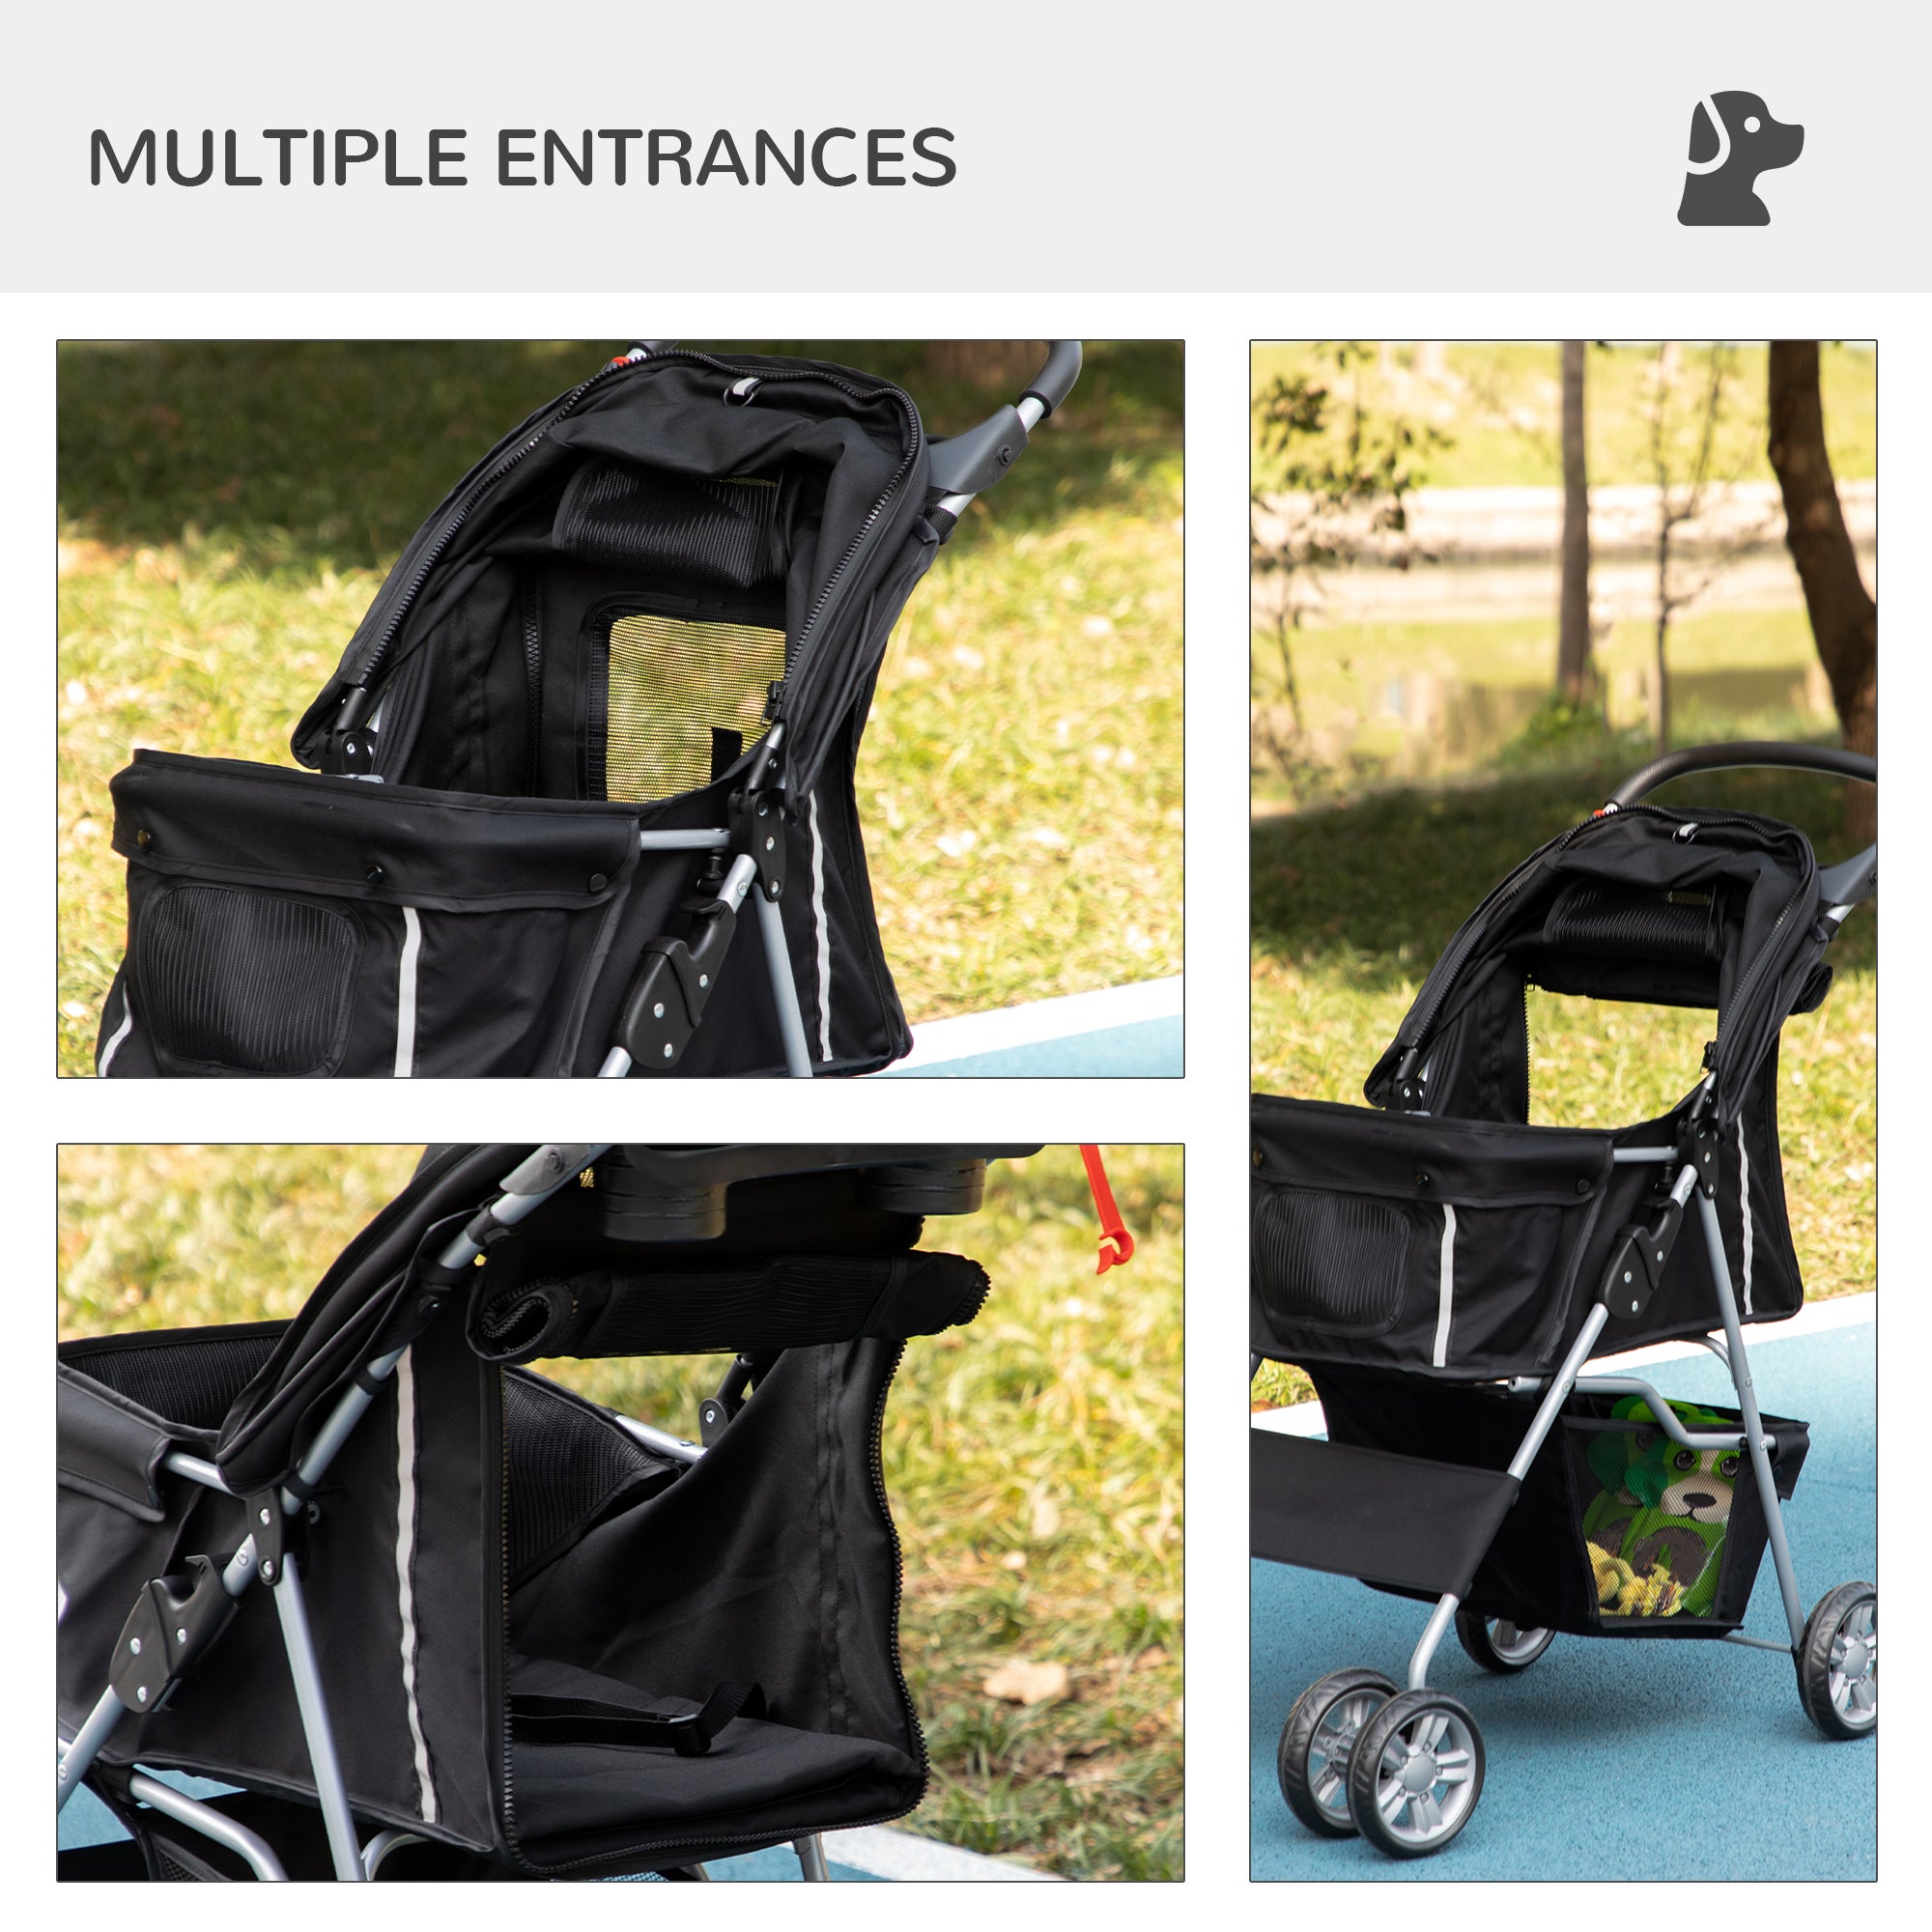 PawHut Pet Stroller Dog Pushchair Foldable Travel Carriage for Small Miniature Dogs Cats w/ Zipper Entry Cup Holder, Black